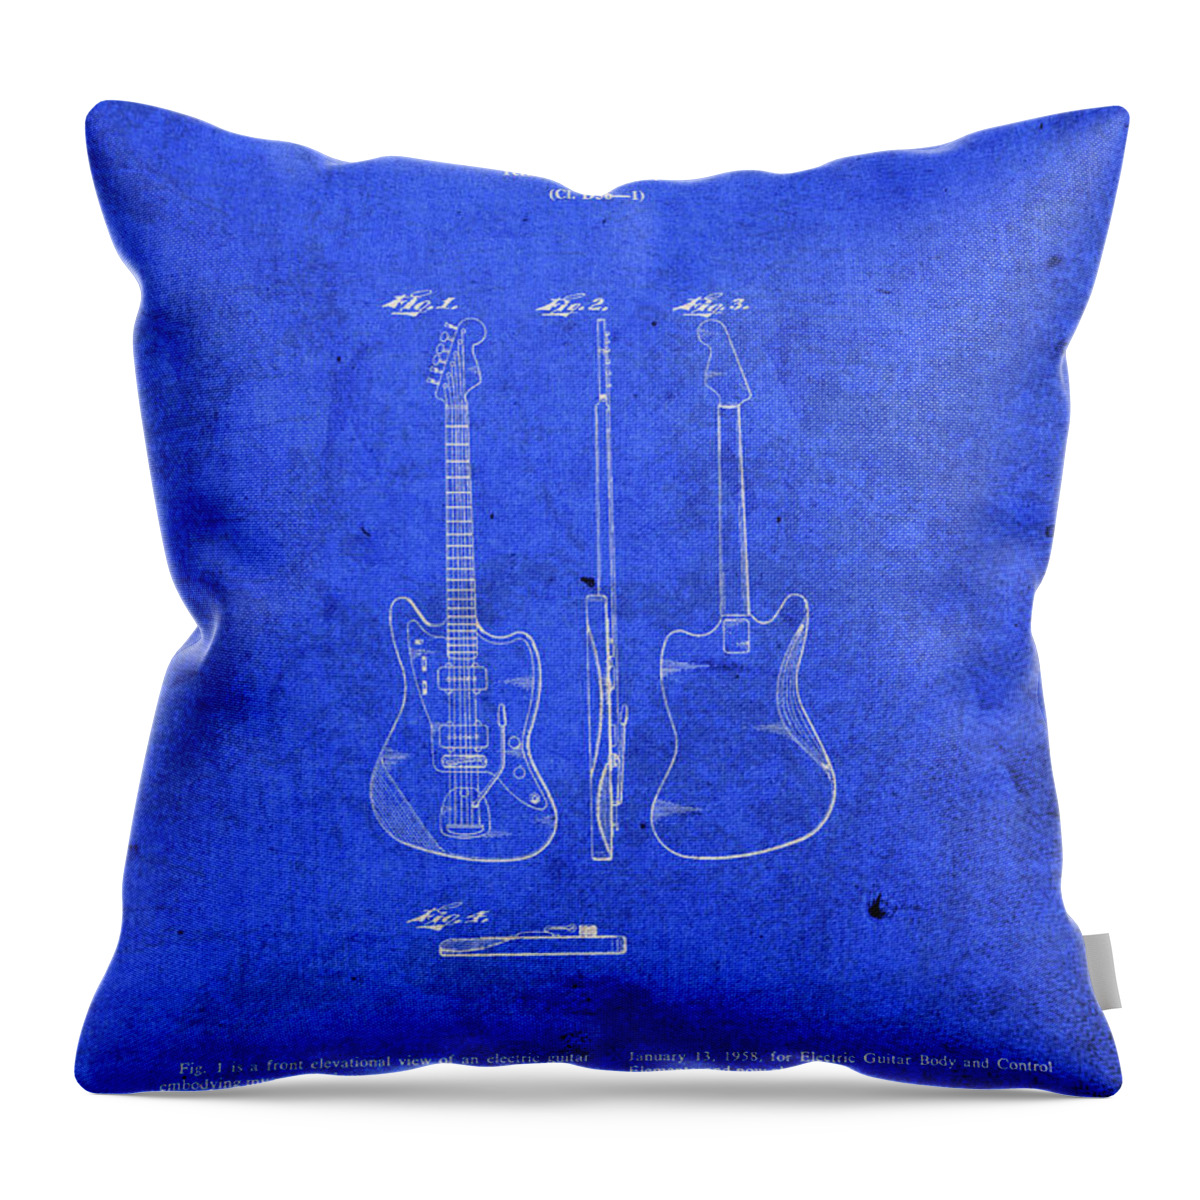 Fender Throw Pillow featuring the mixed media Fender Electric Guitar Patent Blueprint by Design Turnpike